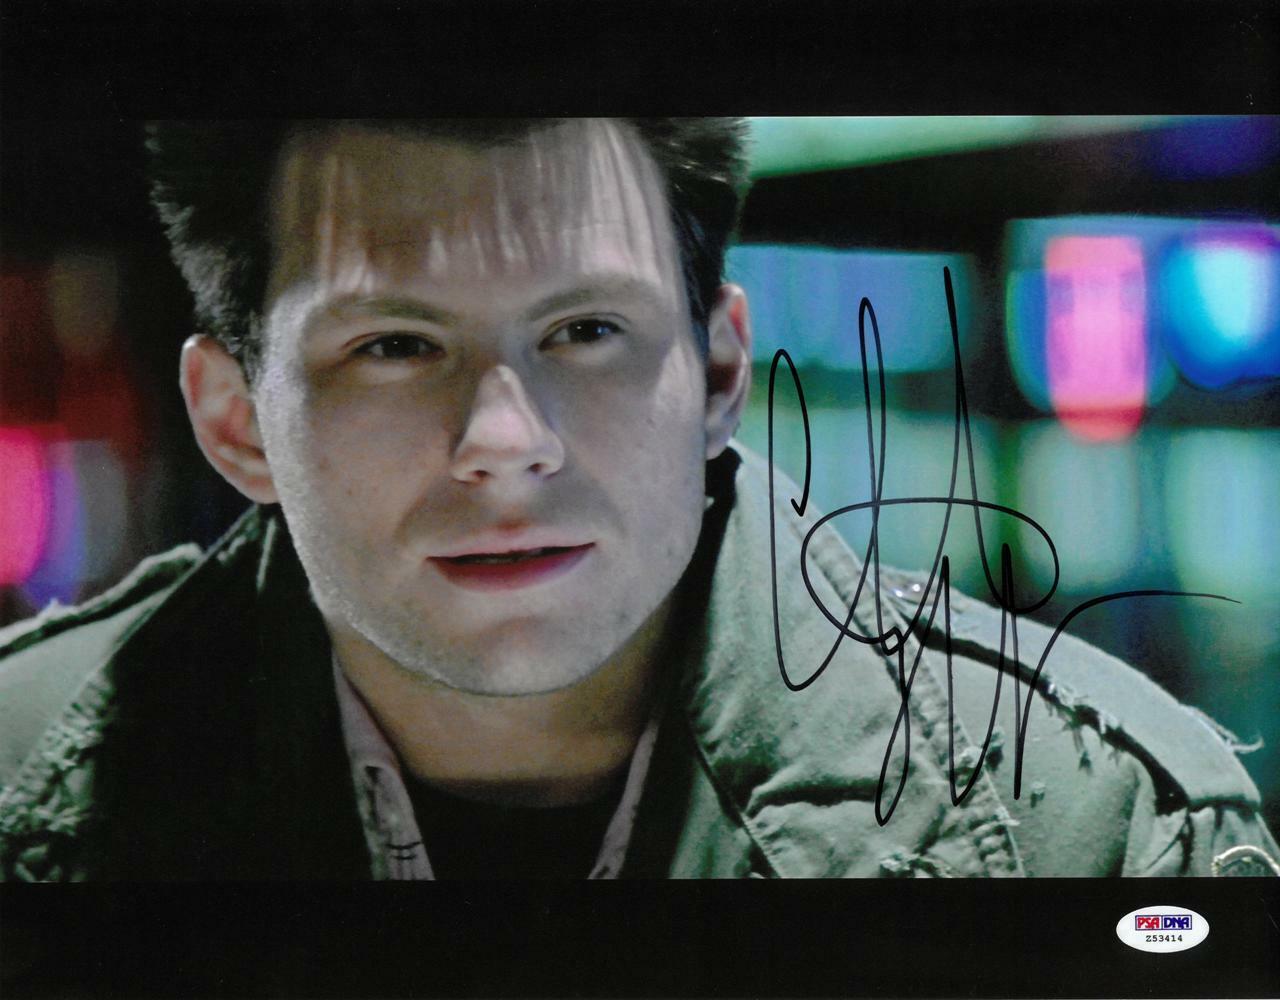 Christian Slater Signed True Romance Autographed 11x14 Photo Poster painting PSA/DNA #Z53414